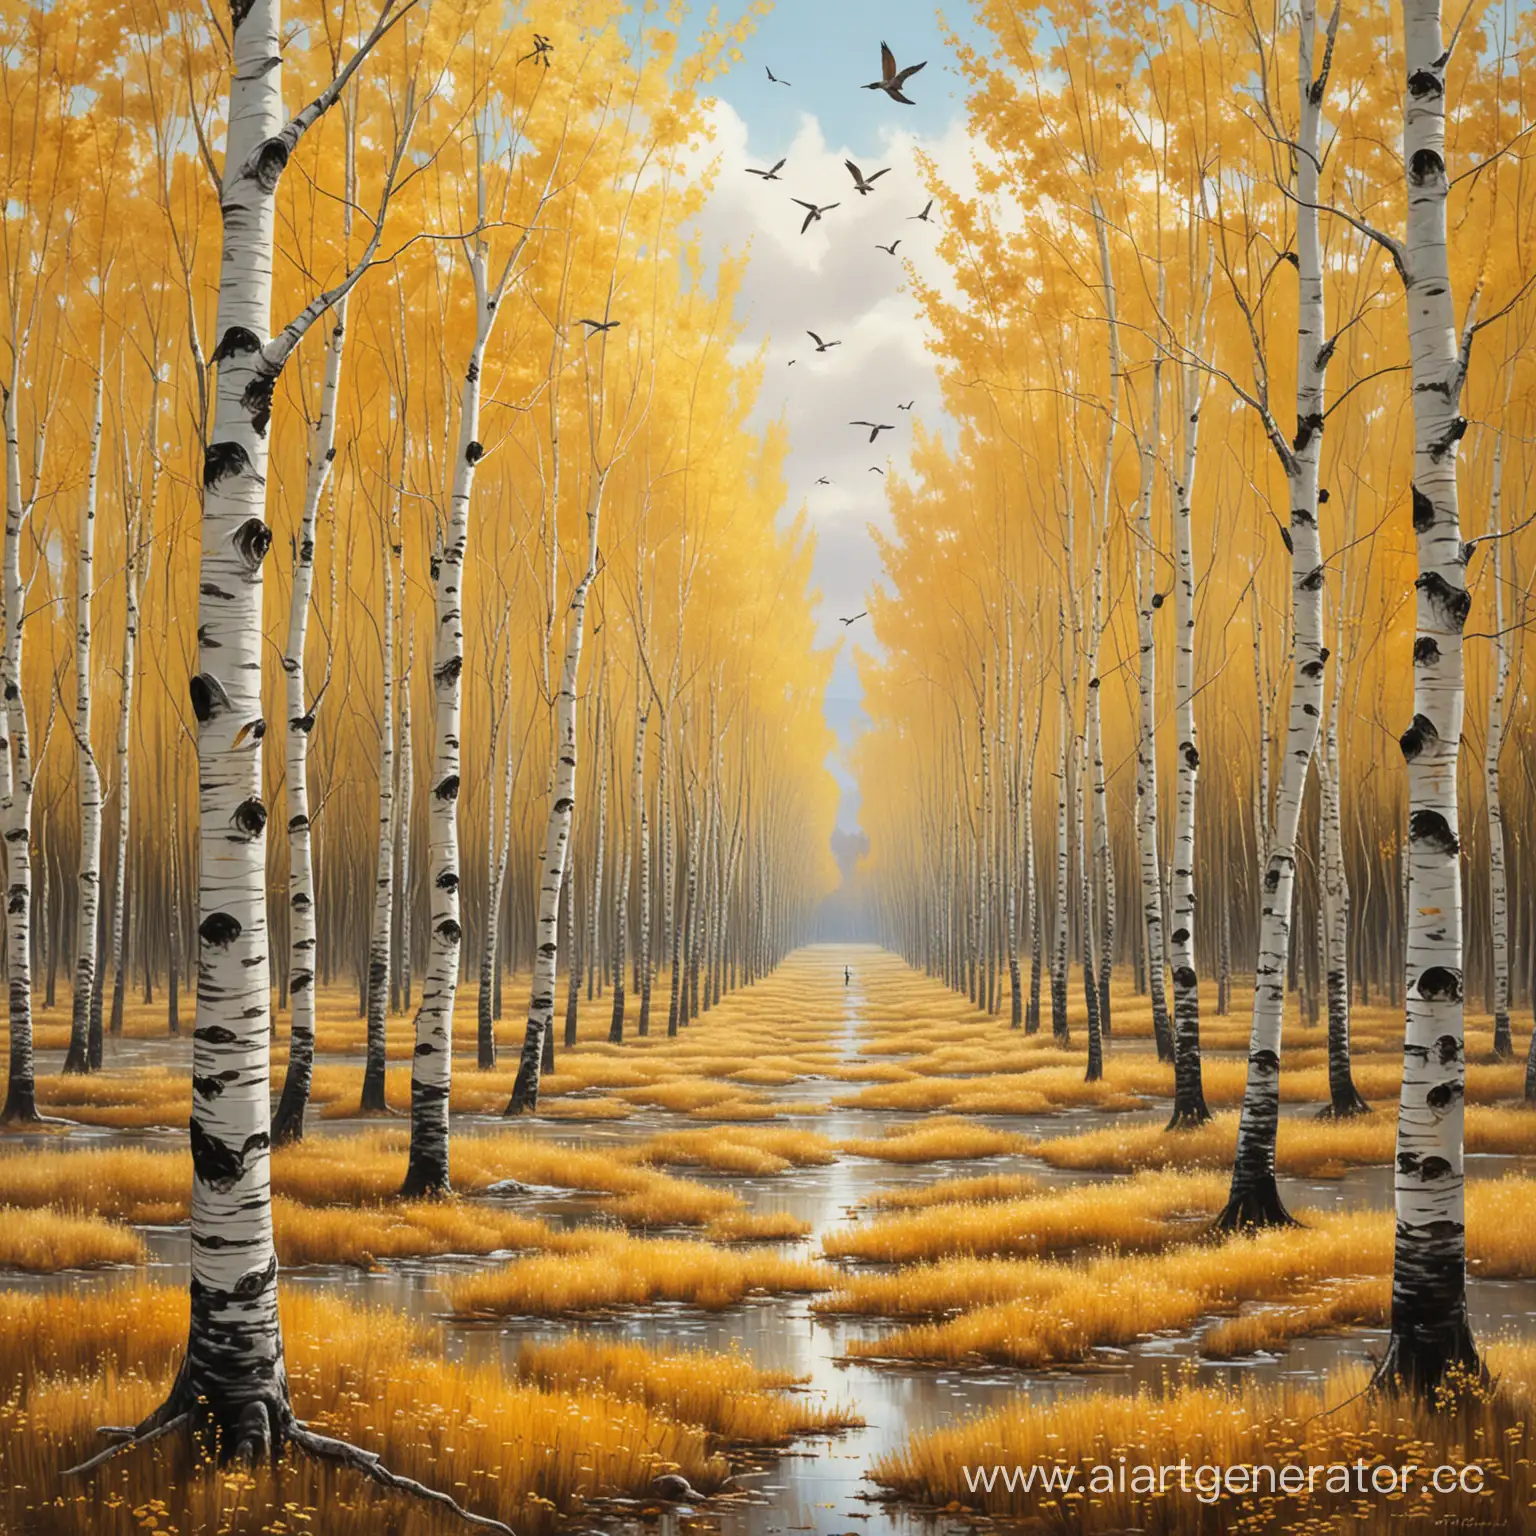 Tranquil-Golden-Birch-Grove-with-Graceful-Flying-Cranes